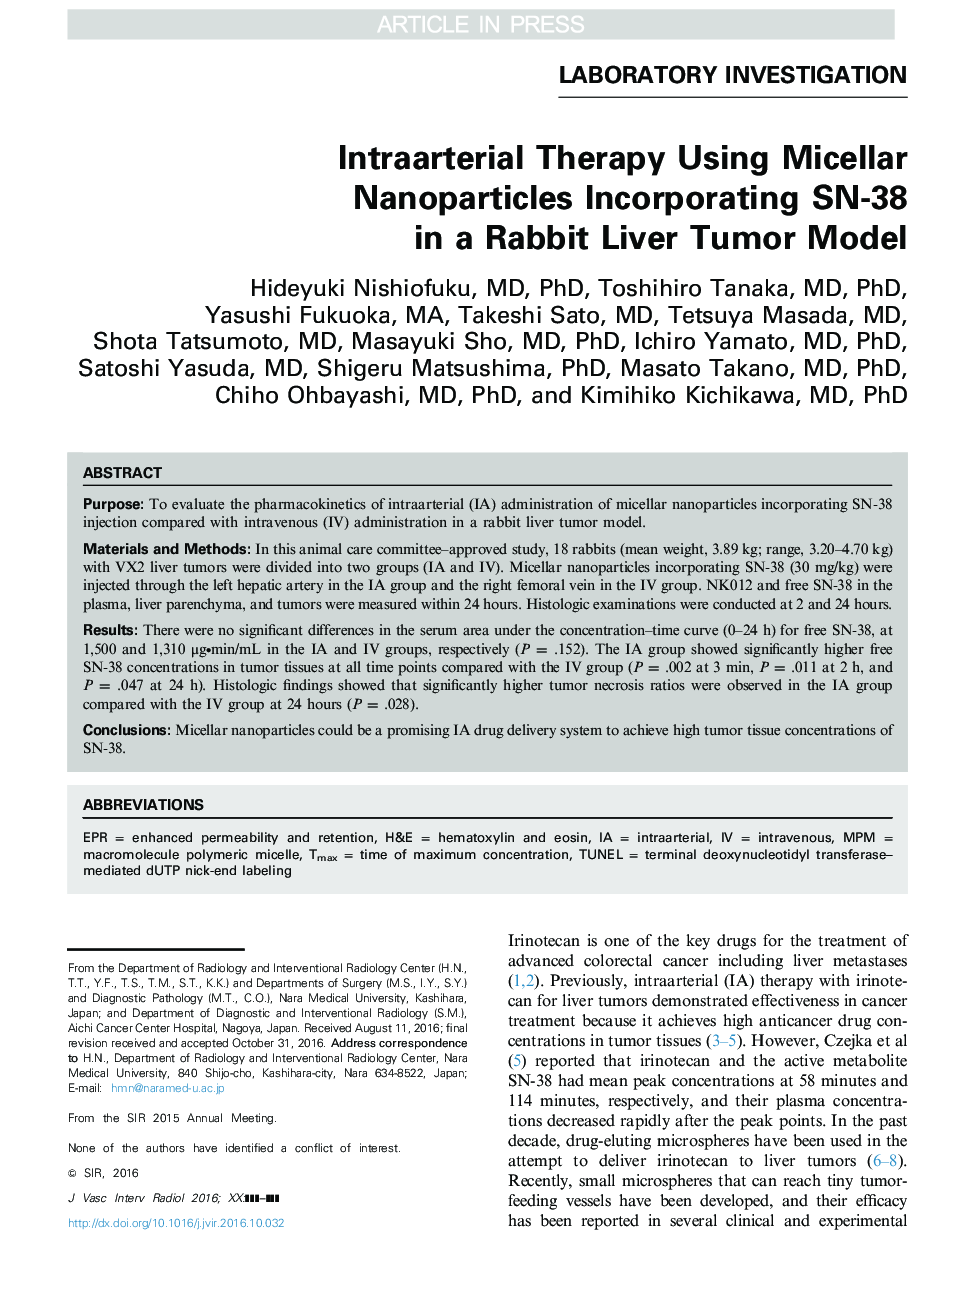 Intraarterial Therapy Using Micellar Nanoparticles Incorporating SN-38 in a Rabbit Liver Tumor Model